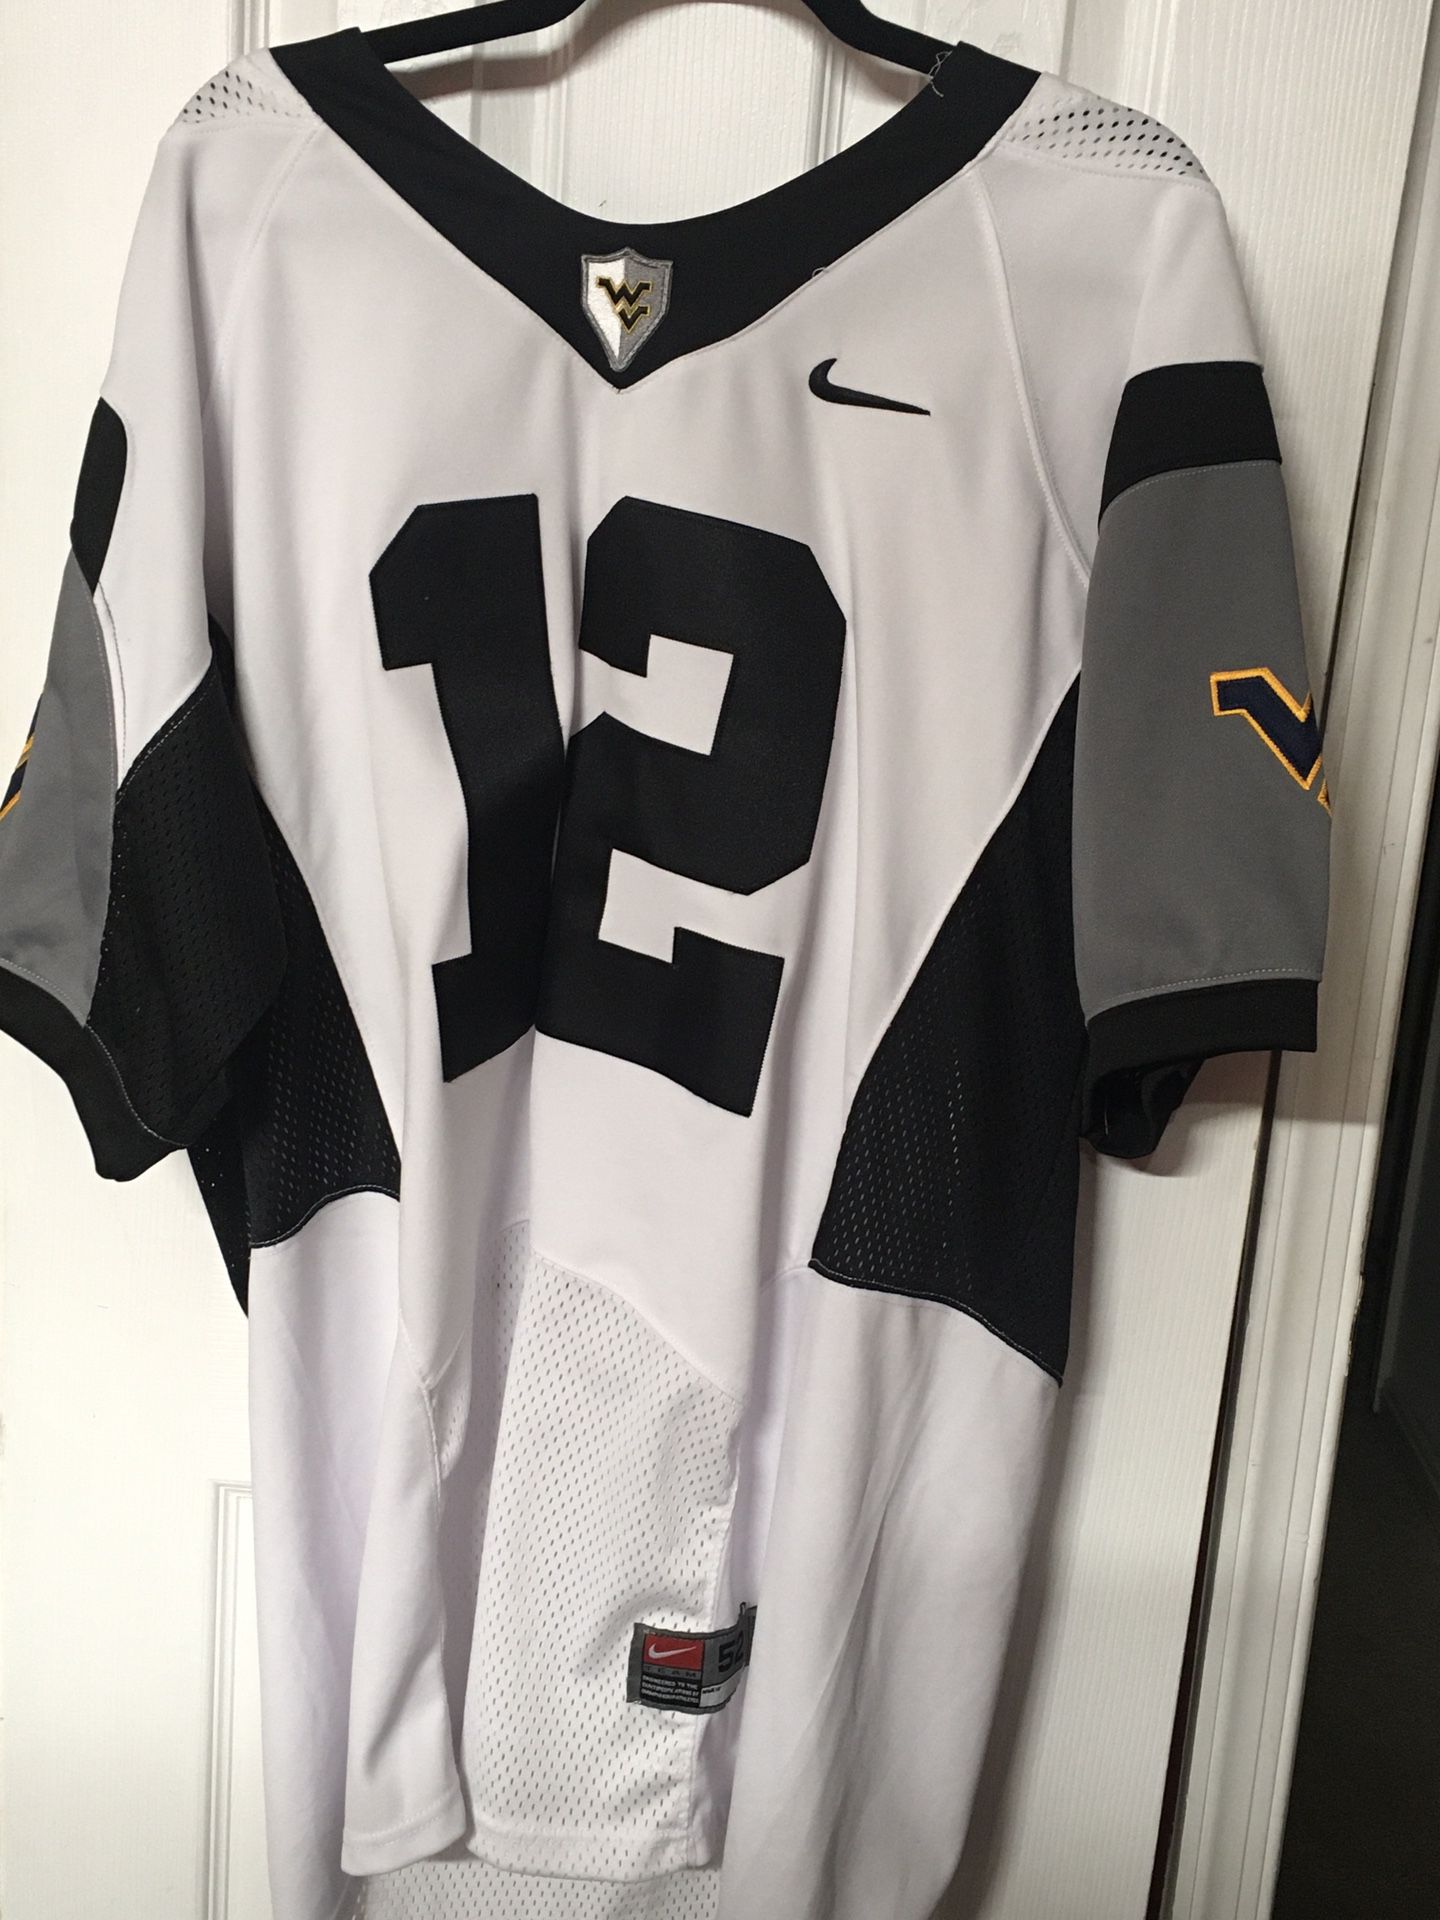 West Virginia Mountaineers Geno Smith Nike Football Jersey 12 Geno Smith Sz52 2X Black and White jersey RARE Current Seattle Seahawks starter No rips,